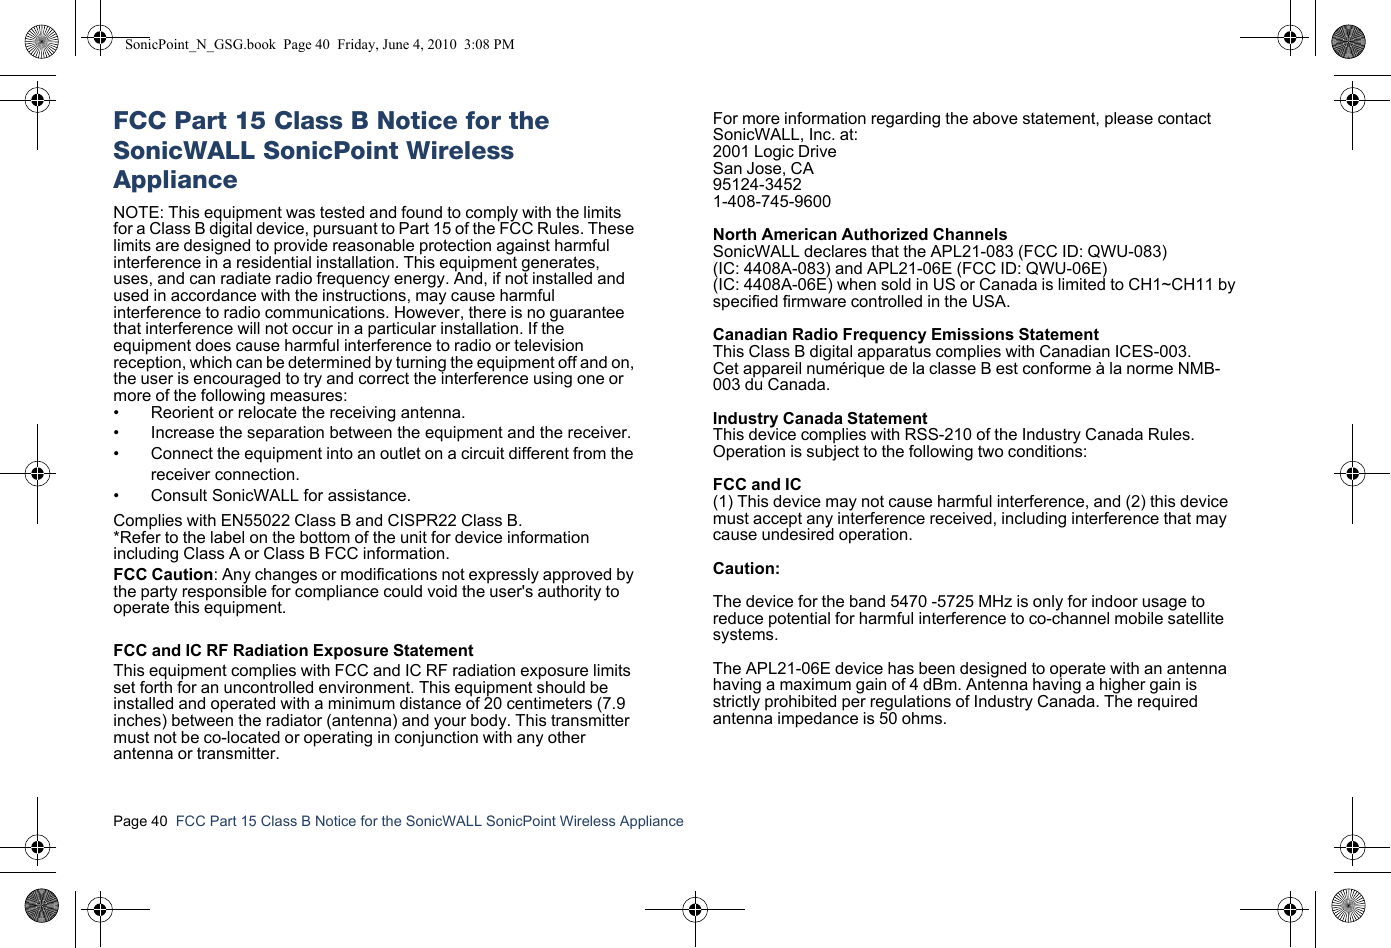 Page 40  FCC Part 15 Class B Notice for the SonicWALL SonicPoint Wireless Appliance  FCC Part 15 Class B Notice for the SonicWALL SonicPoint Wireless ApplianceNOTE: This equipment was tested and found to comply with the limits for a Class B digital device, pursuant to Part 15 of the FCC Rules. These limits are designed to provide reasonable protection against harmful interference in a residential installation. This equipment generates, uses, and can radiate radio frequency energy. And, if not installed and used in accordance with the instructions, may cause harmful interference to radio communications. However, there is no guarantee that interference will not occur in a particular installation. If the equipment does cause harmful interference to radio or television reception, which can be determined by turning the equipment off and on, the user is encouraged to try and correct the interference using one or more of the following measures:• Reorient or relocate the receiving antenna.• Increase the separation between the equipment and the receiver.• Connect the equipment into an outlet on a circuit different from the receiver connection.• Consult SonicWALL for assistance.Complies with EN55022 Class B and CISPR22 Class B.*Refer to the label on the bottom of the unit for device information including Class A or Class B FCC information.FCC Caution: Any changes or modifications not expressly approved by the party responsible for compliance could void the user&apos;s authority to operate this equipment.FCC and IC RF Radiation Exposure StatementThis equipment complies with FCC and IC RF radiation exposure limits set forth for an uncontrolled environment. This equipment should be installed and operated with a minimum distance of 20 centimeters (7.9 inches) between the radiator (antenna) and your body. This transmitter must not be co-located or operating in conjunction with any other antenna or transmitter. For more information regarding the above statement, please contact SonicWALL, Inc. at:2001 Logic DriveSan Jose, CA95124-34521-408-745-9600North American Authorized ChannelsSonicWALL declares that the APL21-083 (FCC ID: QWU-083)(IC: 4408A-083) and APL21-06E (FCC ID: QWU-06E)(IC: 4408A-06E) when sold in US or Canada is limited to CH1~CH11 byspecified firmware controlled in the USA.Canadian Radio Frequency Emissions StatementThis Class B digital apparatus complies with Canadian ICES-003.Cet appareil numérique de la classe B est conforme à la norme NMB-003 du Canada.Industry Canada StatementThis device complies with RSS-210 of the Industry Canada Rules. Operation is subject to the following two conditions:FCC and IC(1) This device may not cause harmful interference, and (2) this device must accept any interference received, including interference that may cause undesired operation.Caution:The device for the band 5470 -5725 MHz is only for indoor usage to reduce potential for harmful interference to co-channel mobile satellite systems. The APL21-06E device has been designed to operate with an antenna having a maximum gain of 4 dBm. Antenna having a higher gain is strictly prohibited per regulations of Industry Canada. The required antenna impedance is 50 ohms.SonicPoint_N_GSG.book  Page 40  Friday, June 4, 2010  3:08 PM